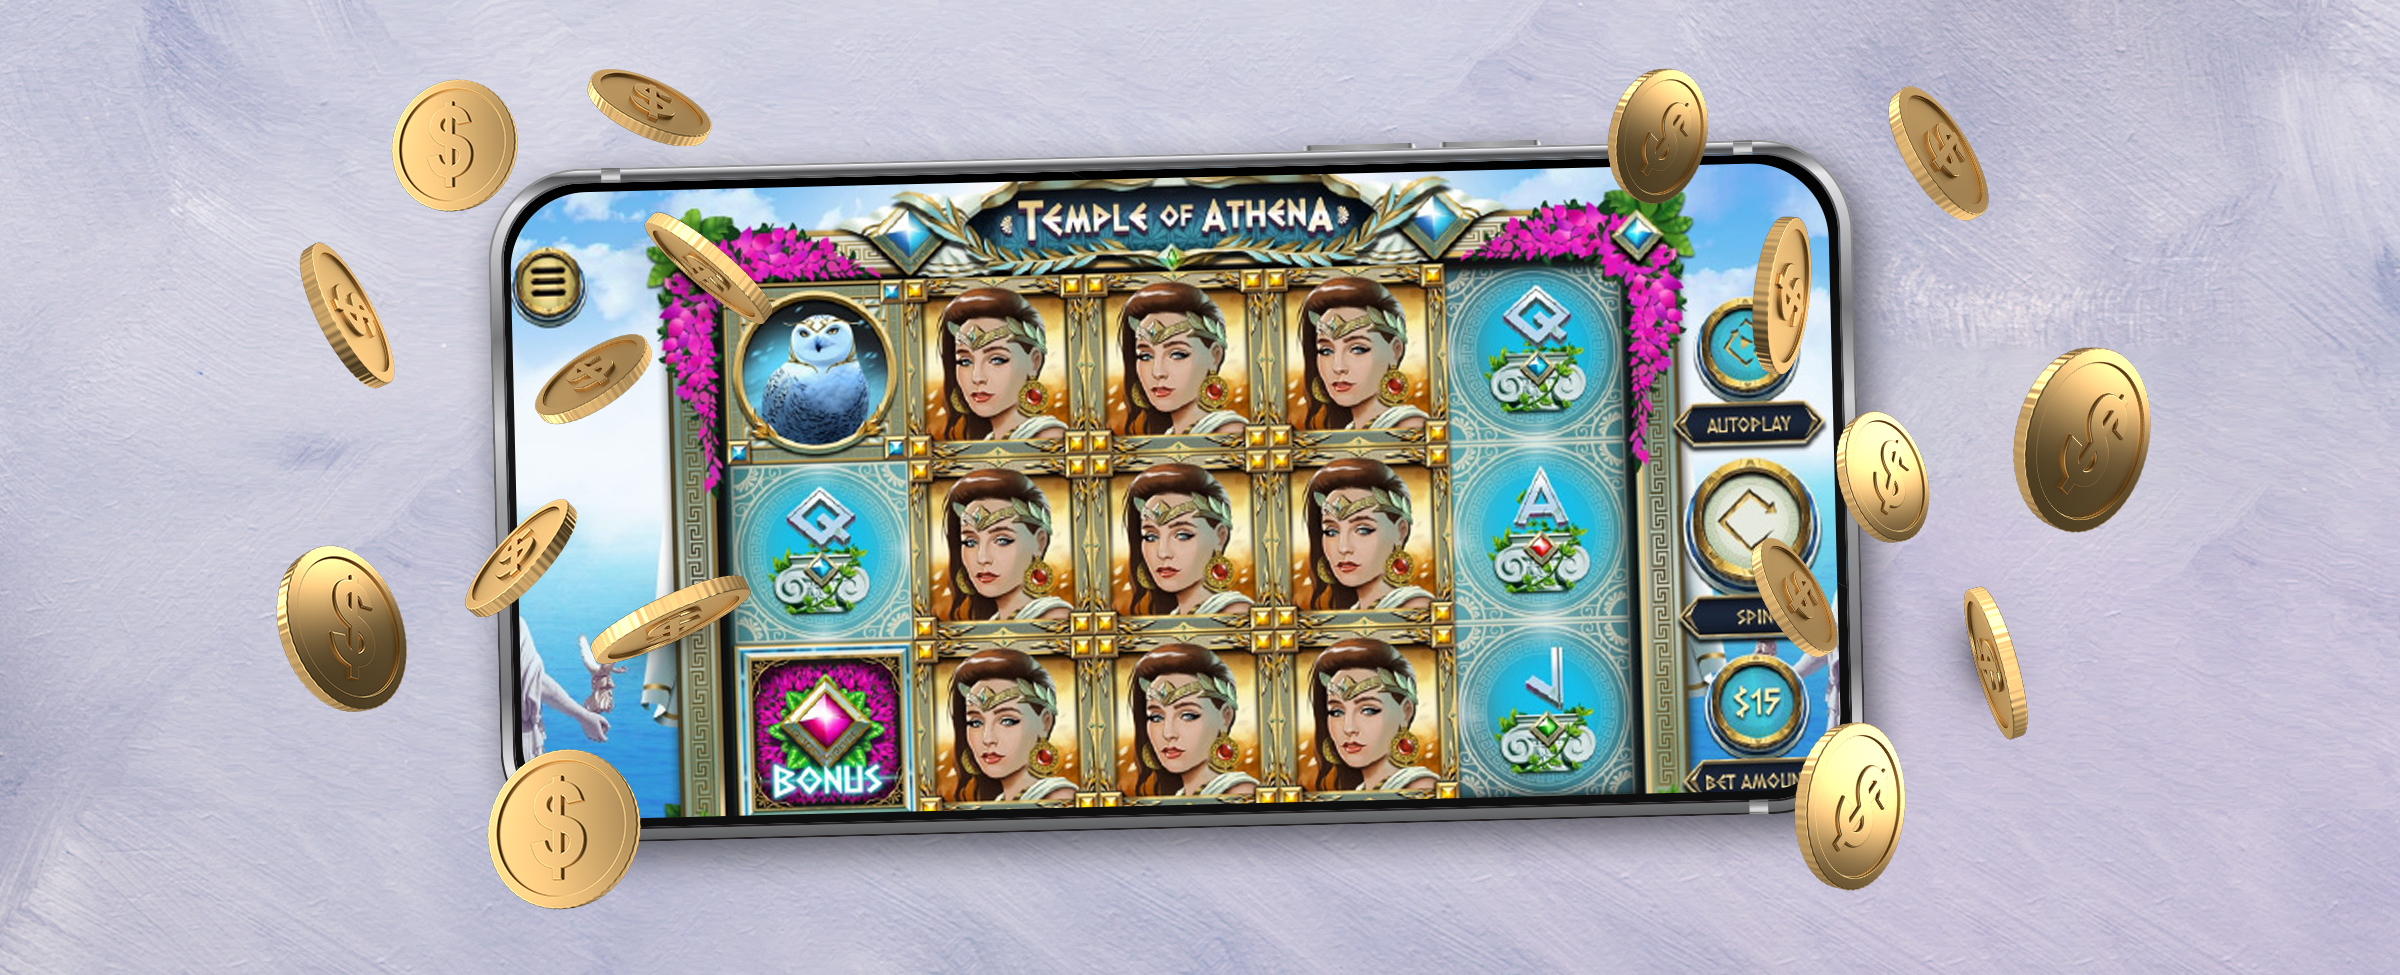 A mobile phone sits atop an off-white table surface, showing a preview of the Cafe Casino slot game, Temple of Athena Hot Drop Jackpots, which is featuring reels showing game symbols. In the foreground are falling gold coins.